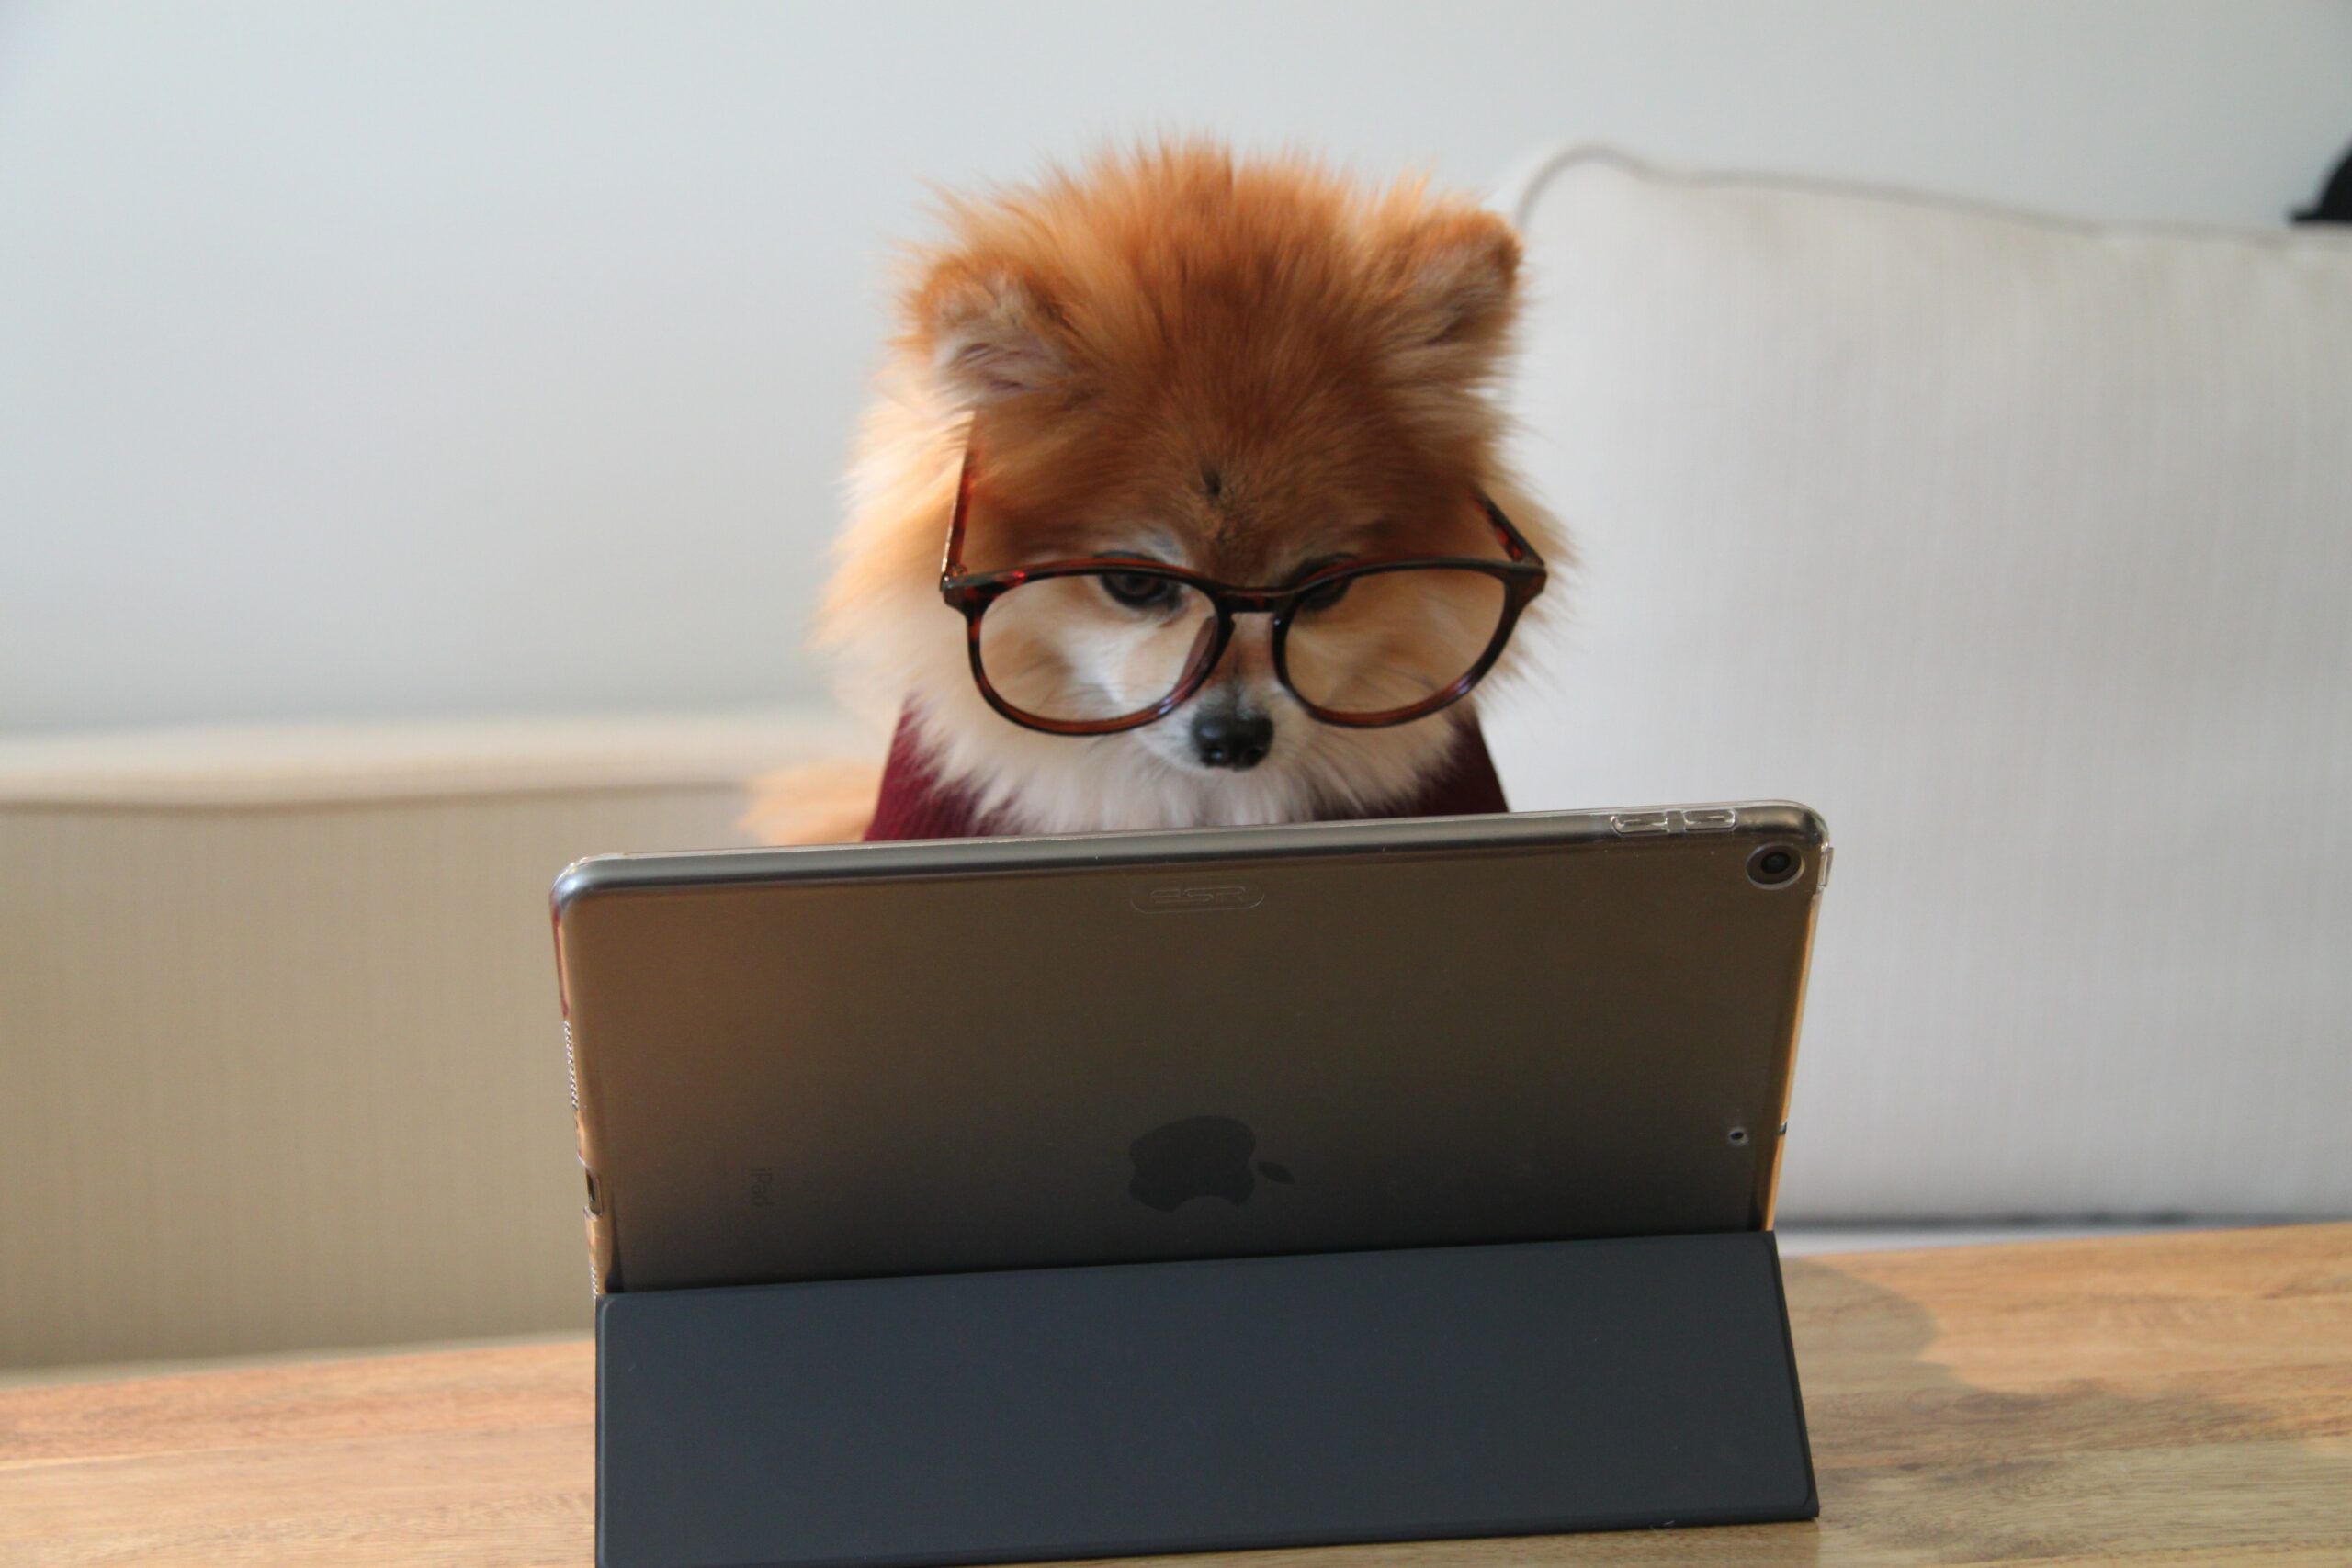 how to sell books on etsy shop policies: a Pomeranian wearing glasses staring at a tablet computer